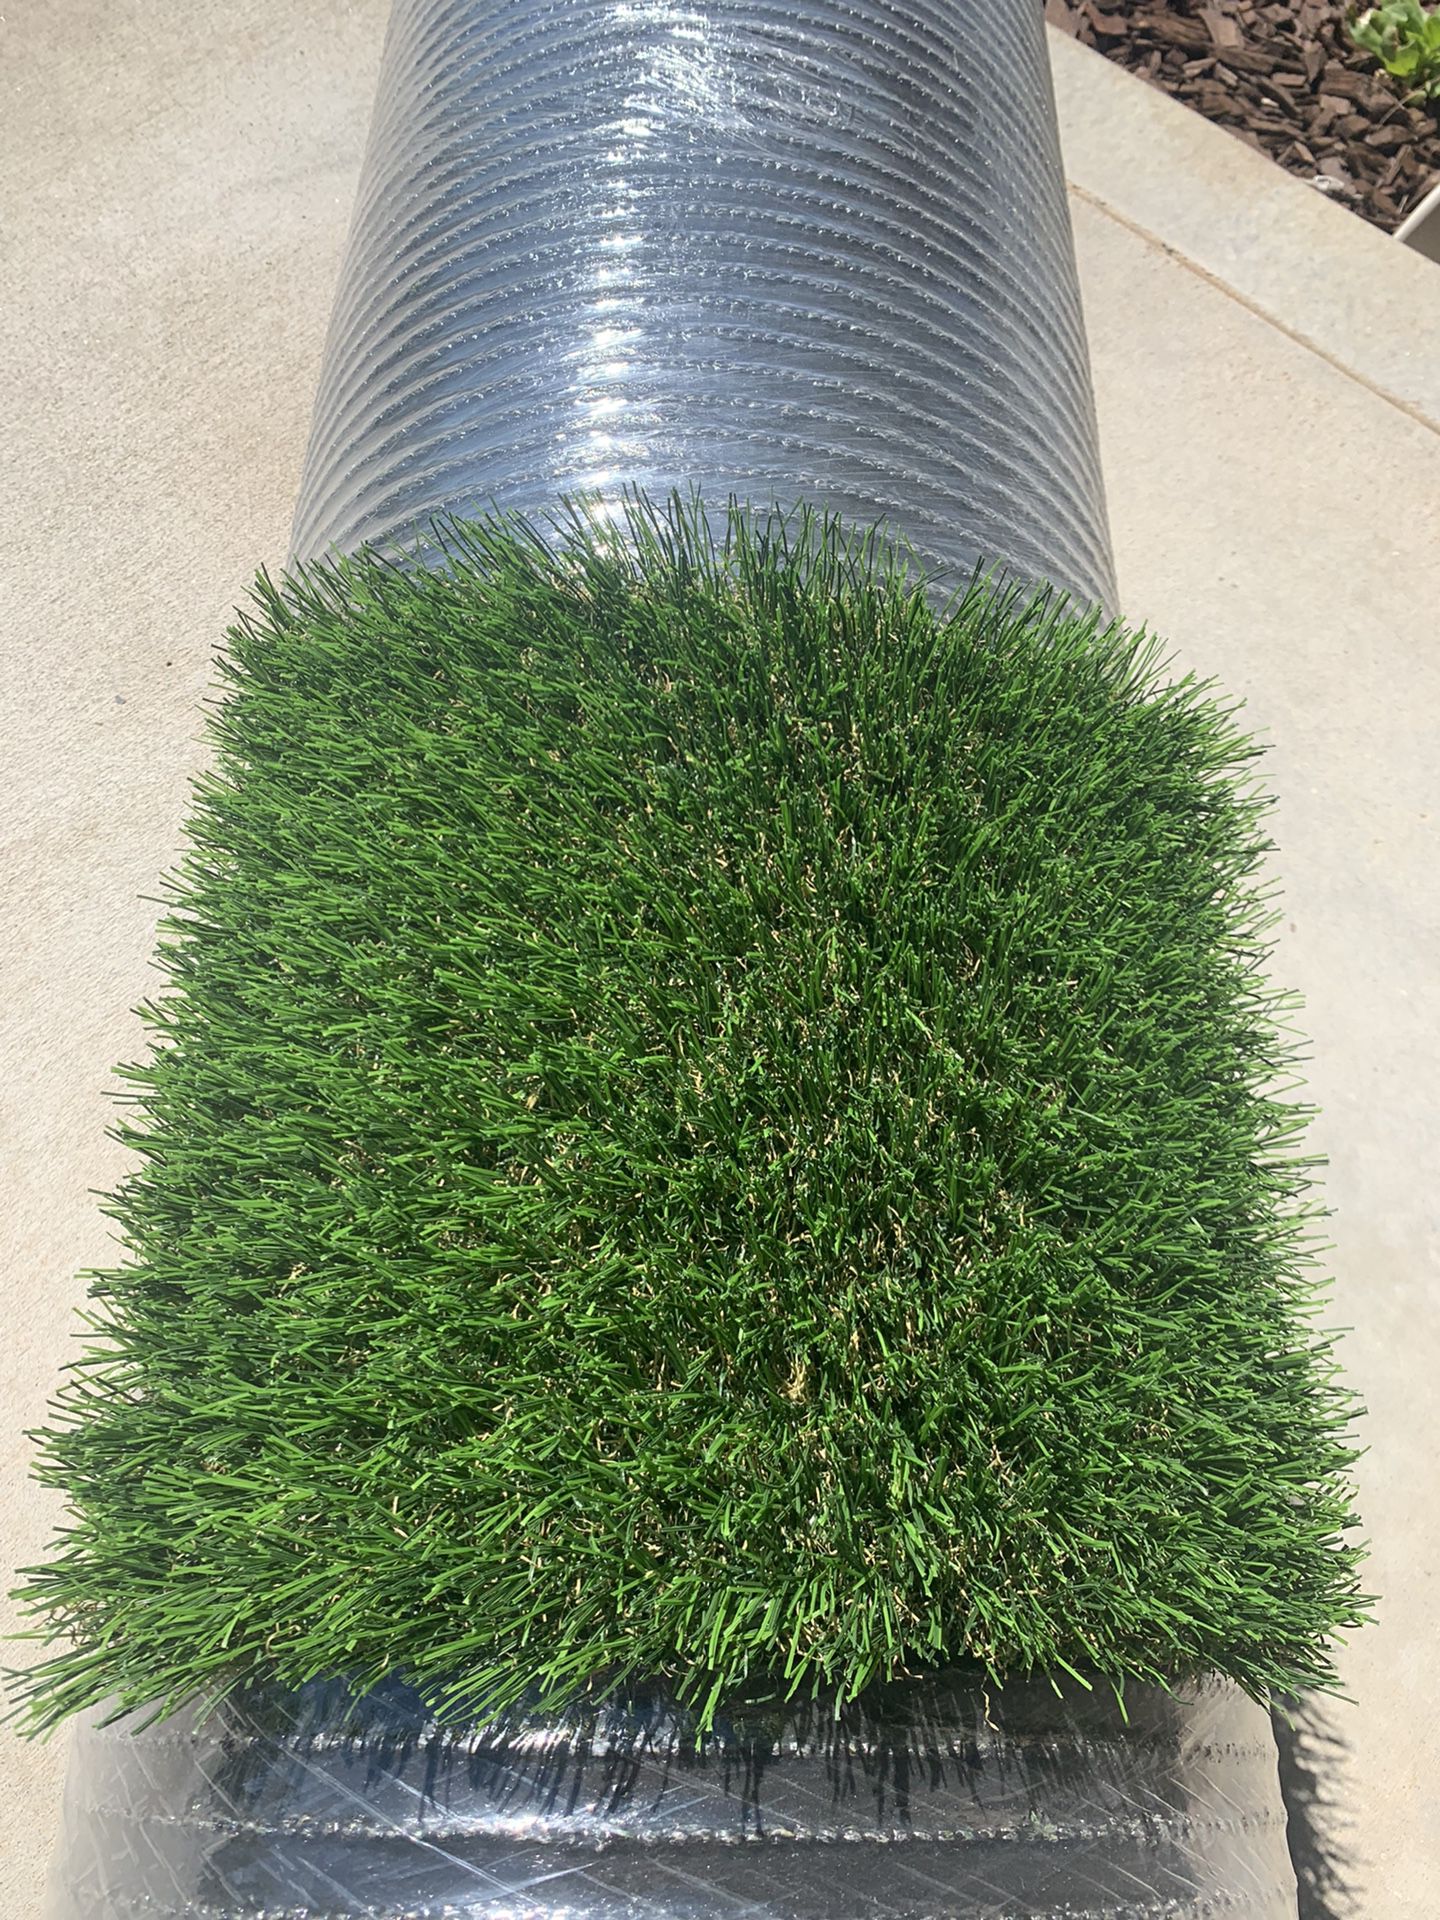 turf-grass-artifical-turf-15x10-340-price-is-firm-for-sale-in-san